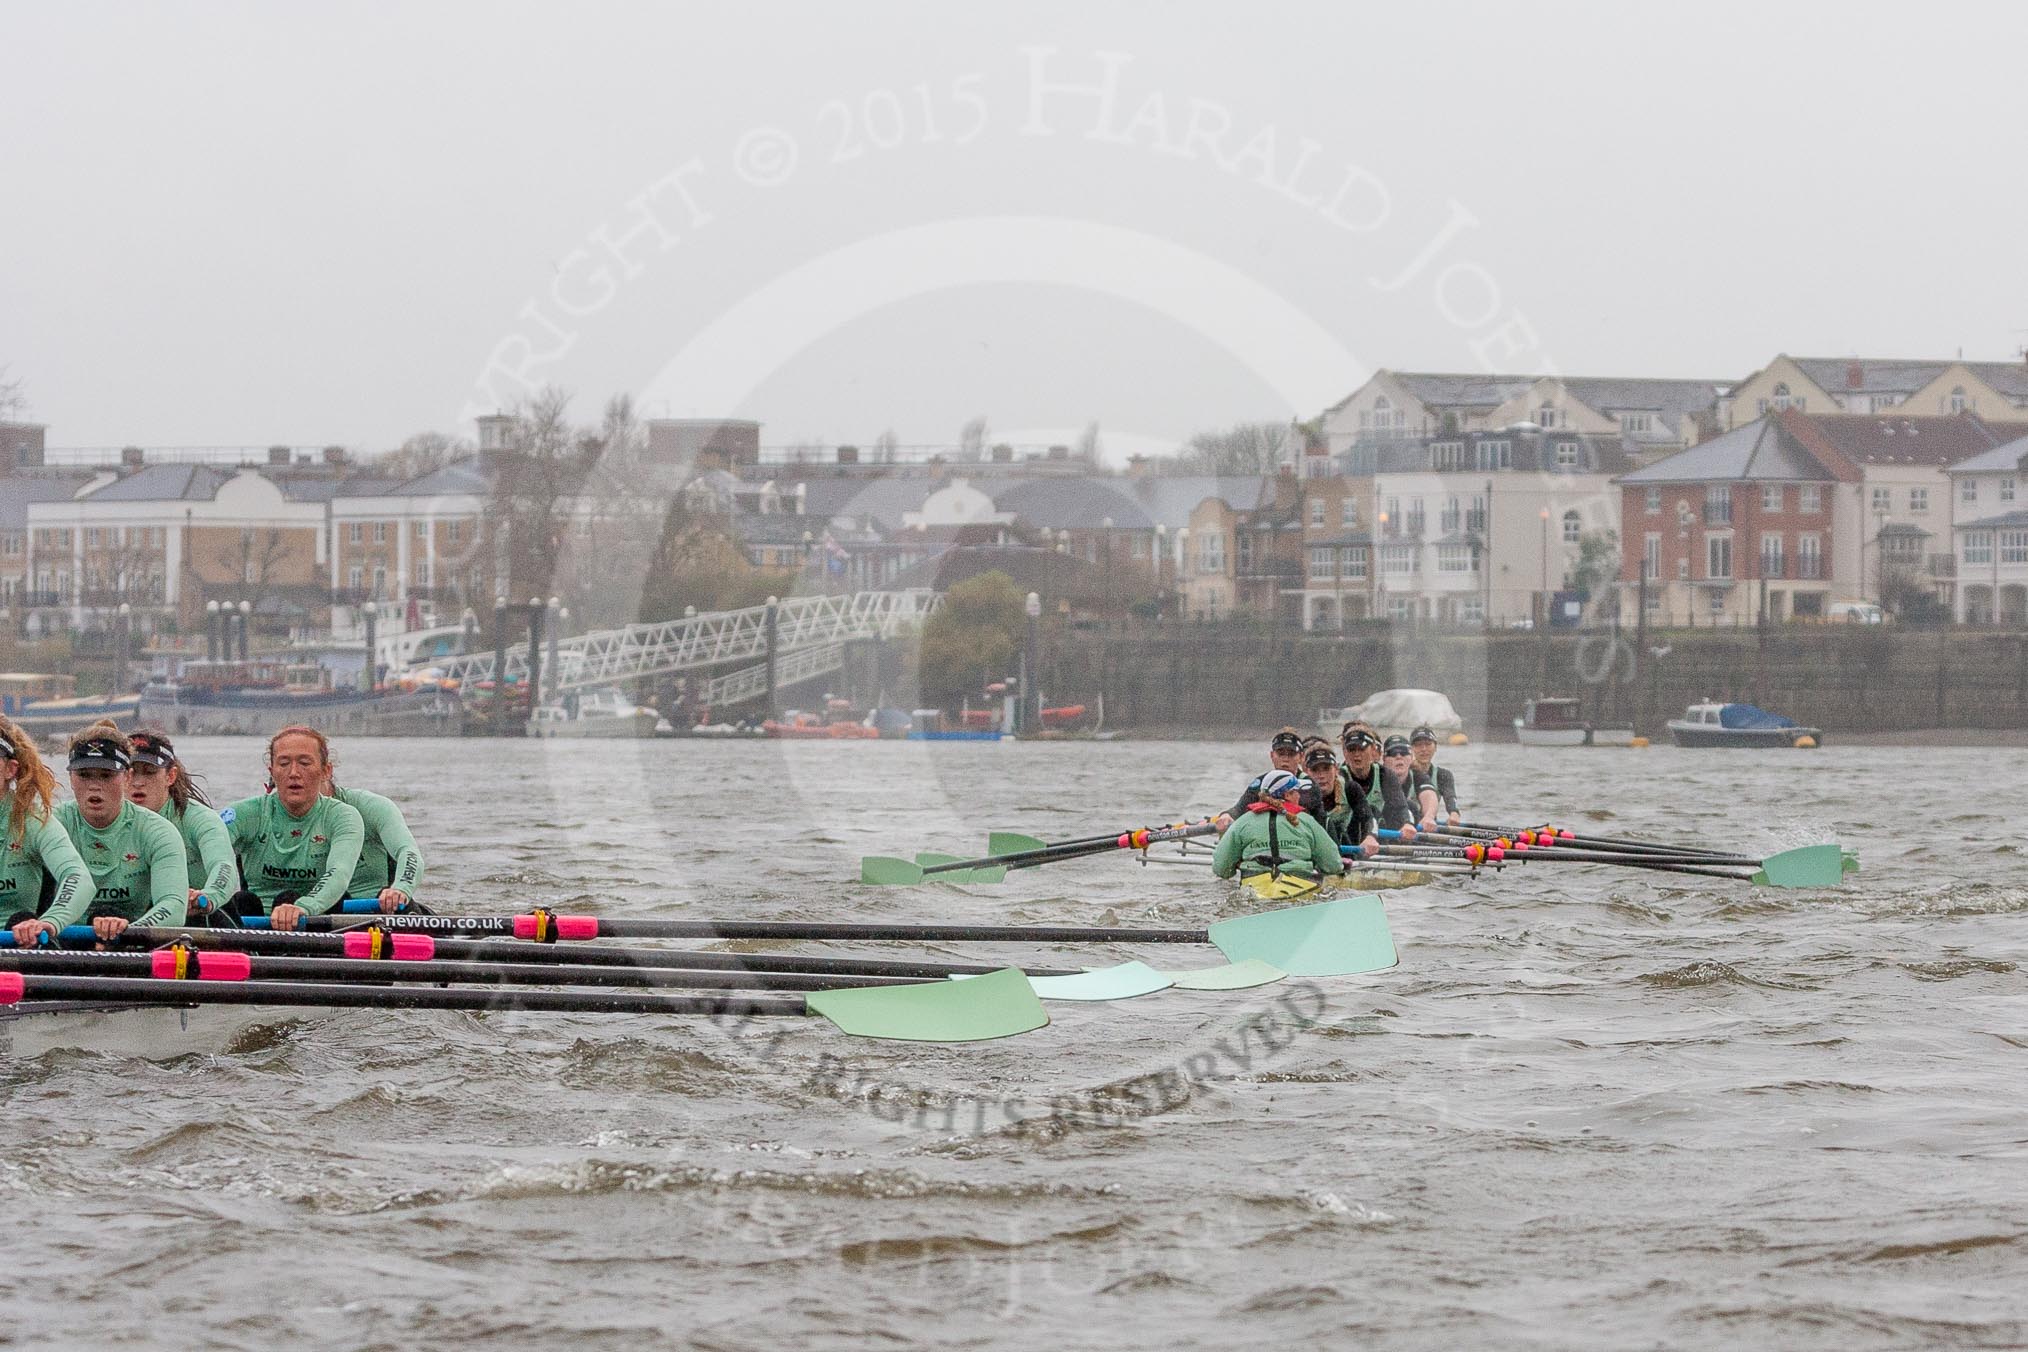 The Boat Race season 2016 - Women's Boat Race Trial Eights (CUWBC, Cambridge): "Twickenham" in the lead at the Surrey Bend, chased by "Tideway".
River Thames between Putney Bridge and Mortlake,
London SW15,

United Kingdom,
on 10 December 2015 at 11:14, image #101